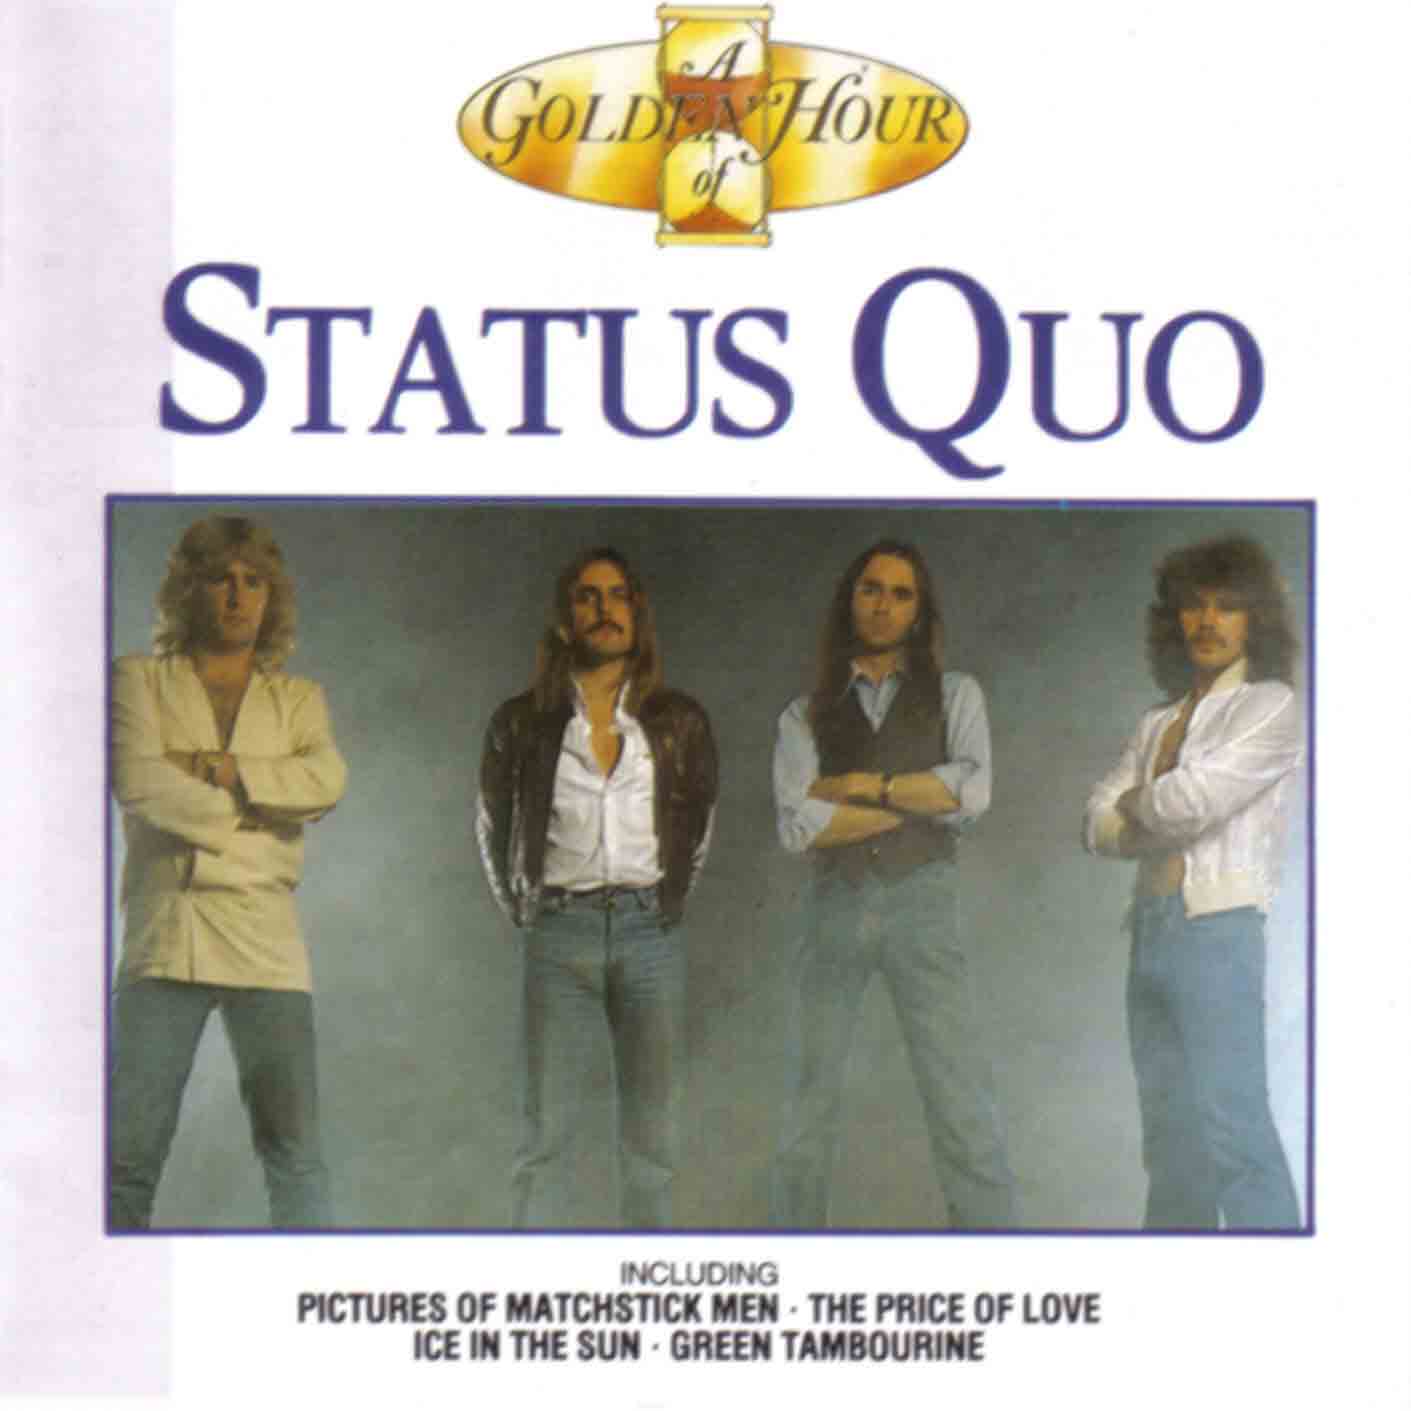 CD-Cover of the Status Quo Kompilation 'A Golden Hour of Status Quo' - KGHCD110